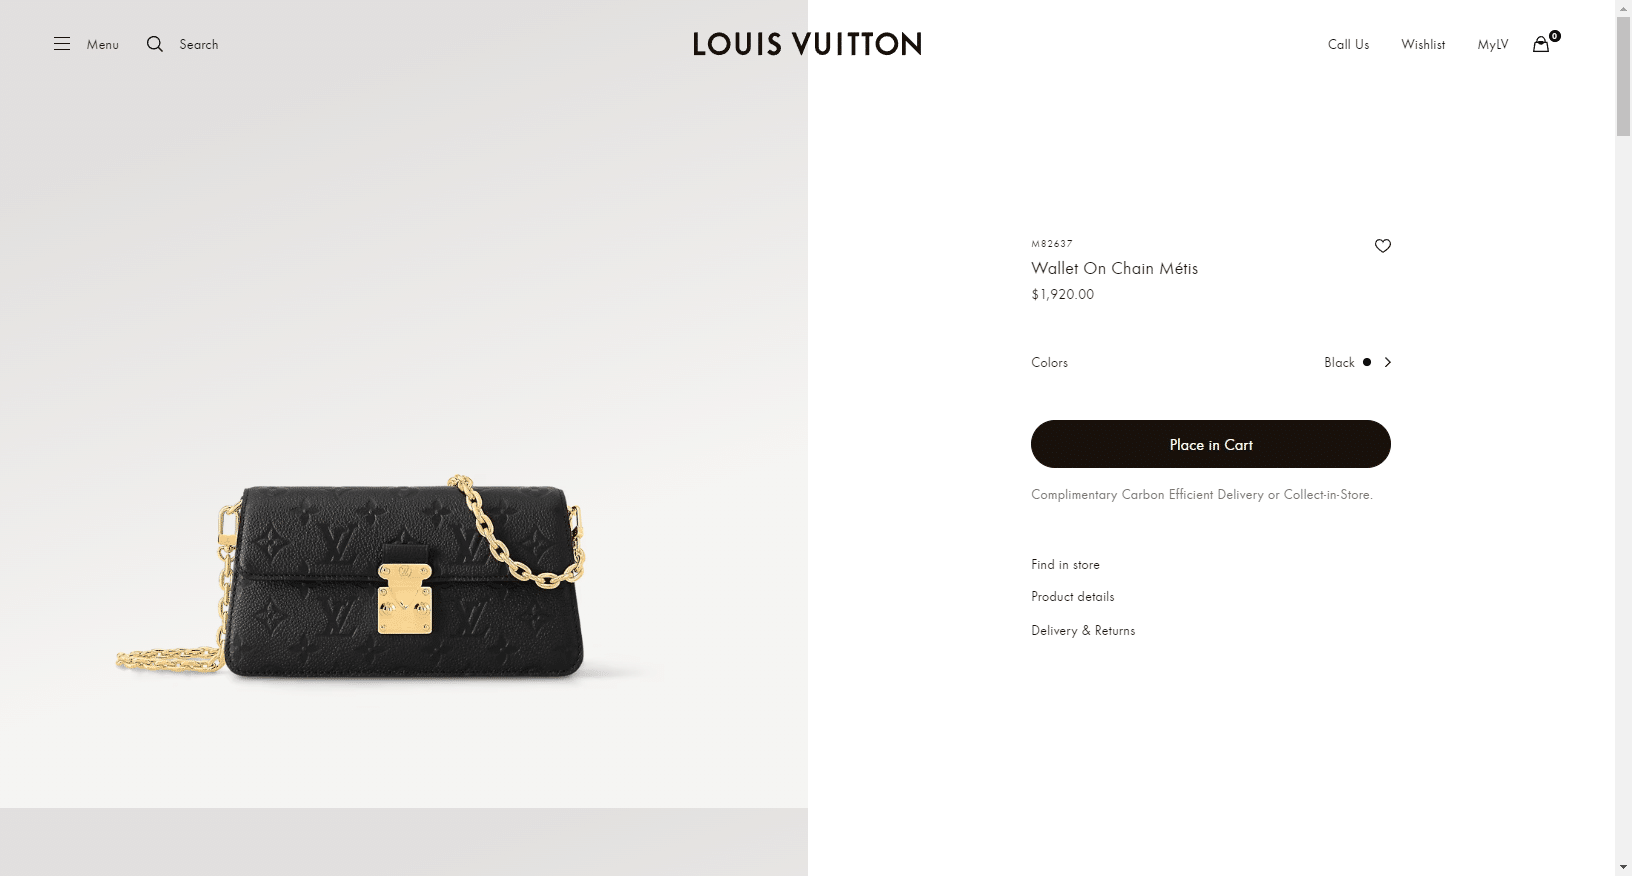 Wallet-On-Chain-Metis-Monogram-Empreinte-Leather-Women-Small-Leather-Goods-LOUIS-VUITTON-.png